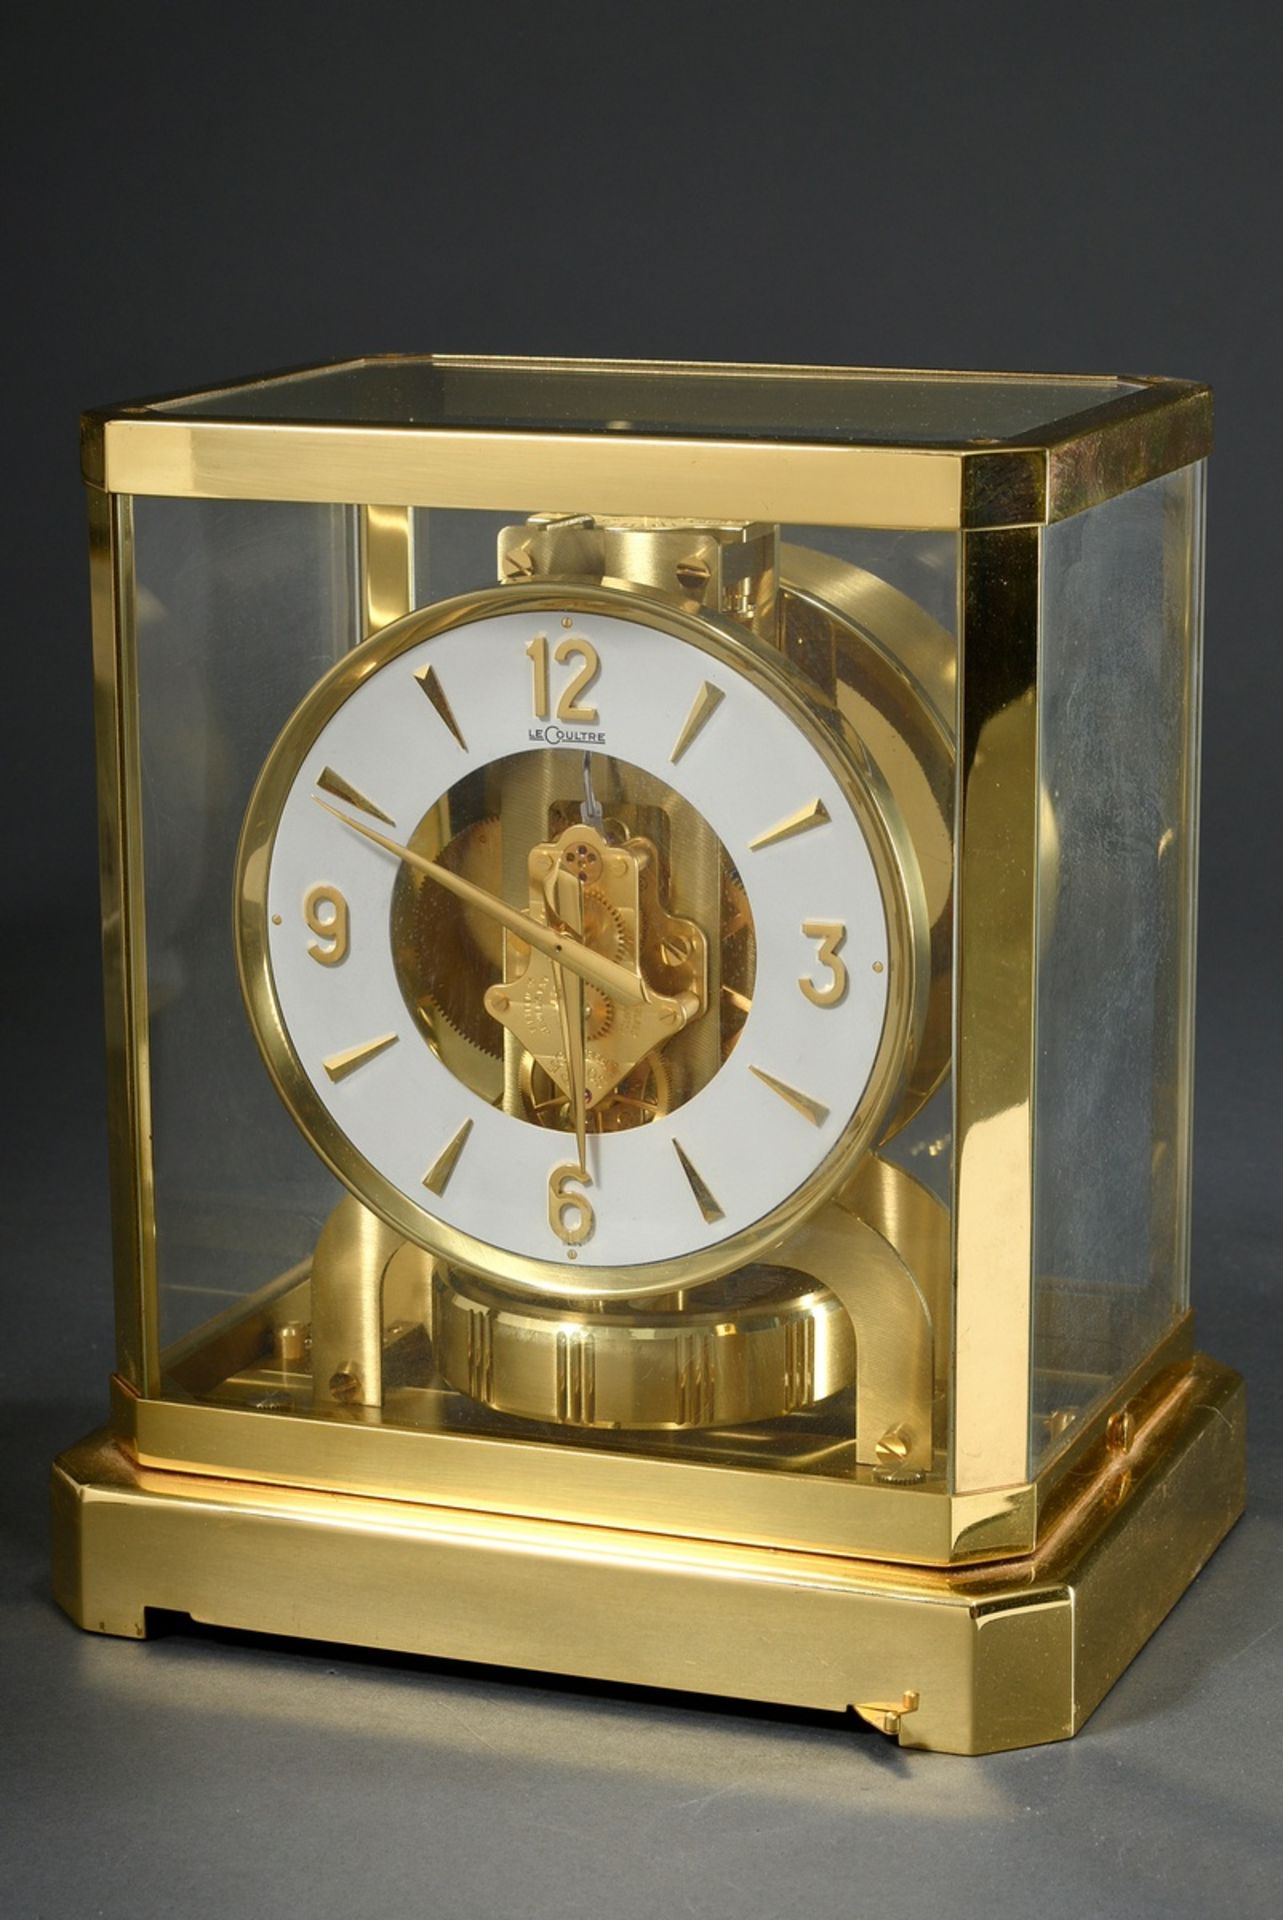 Jaeger Le Coultre "Atmos" table clock, glazed gold-plated brass case, movement number 196633, 23.5x - Image 2 of 7